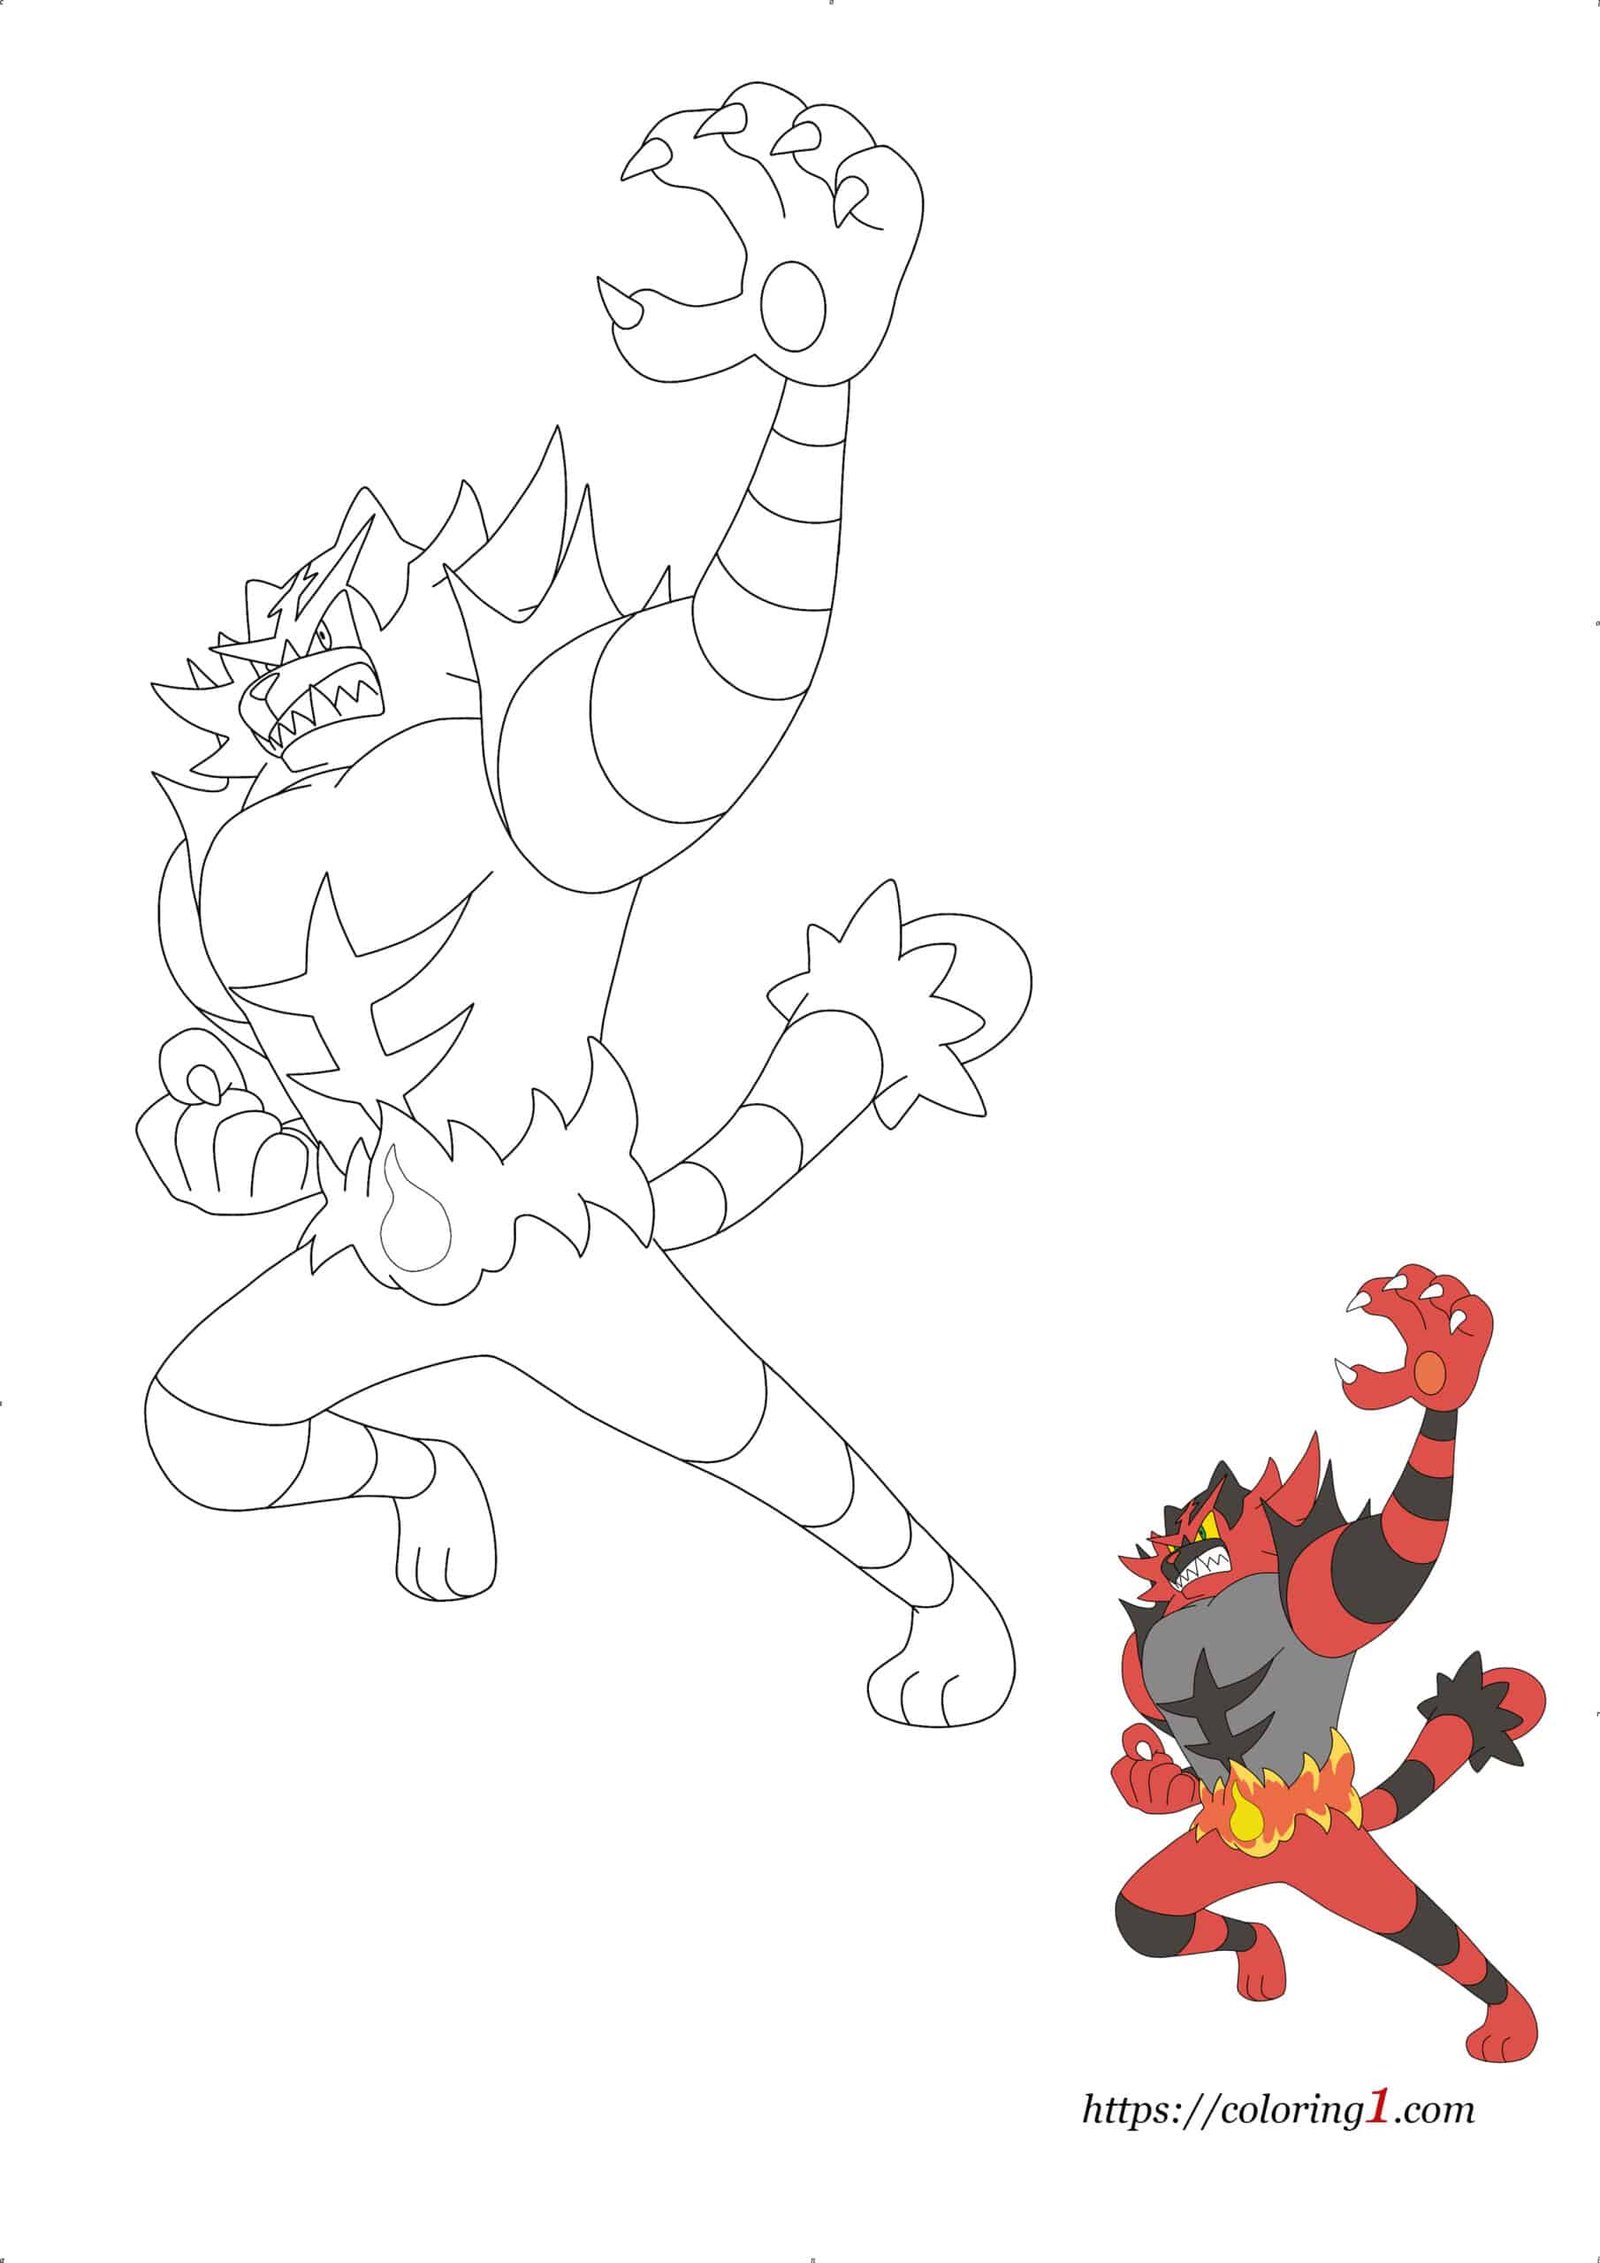 Pokemon Incineroar free printable coloring page for kids and adults